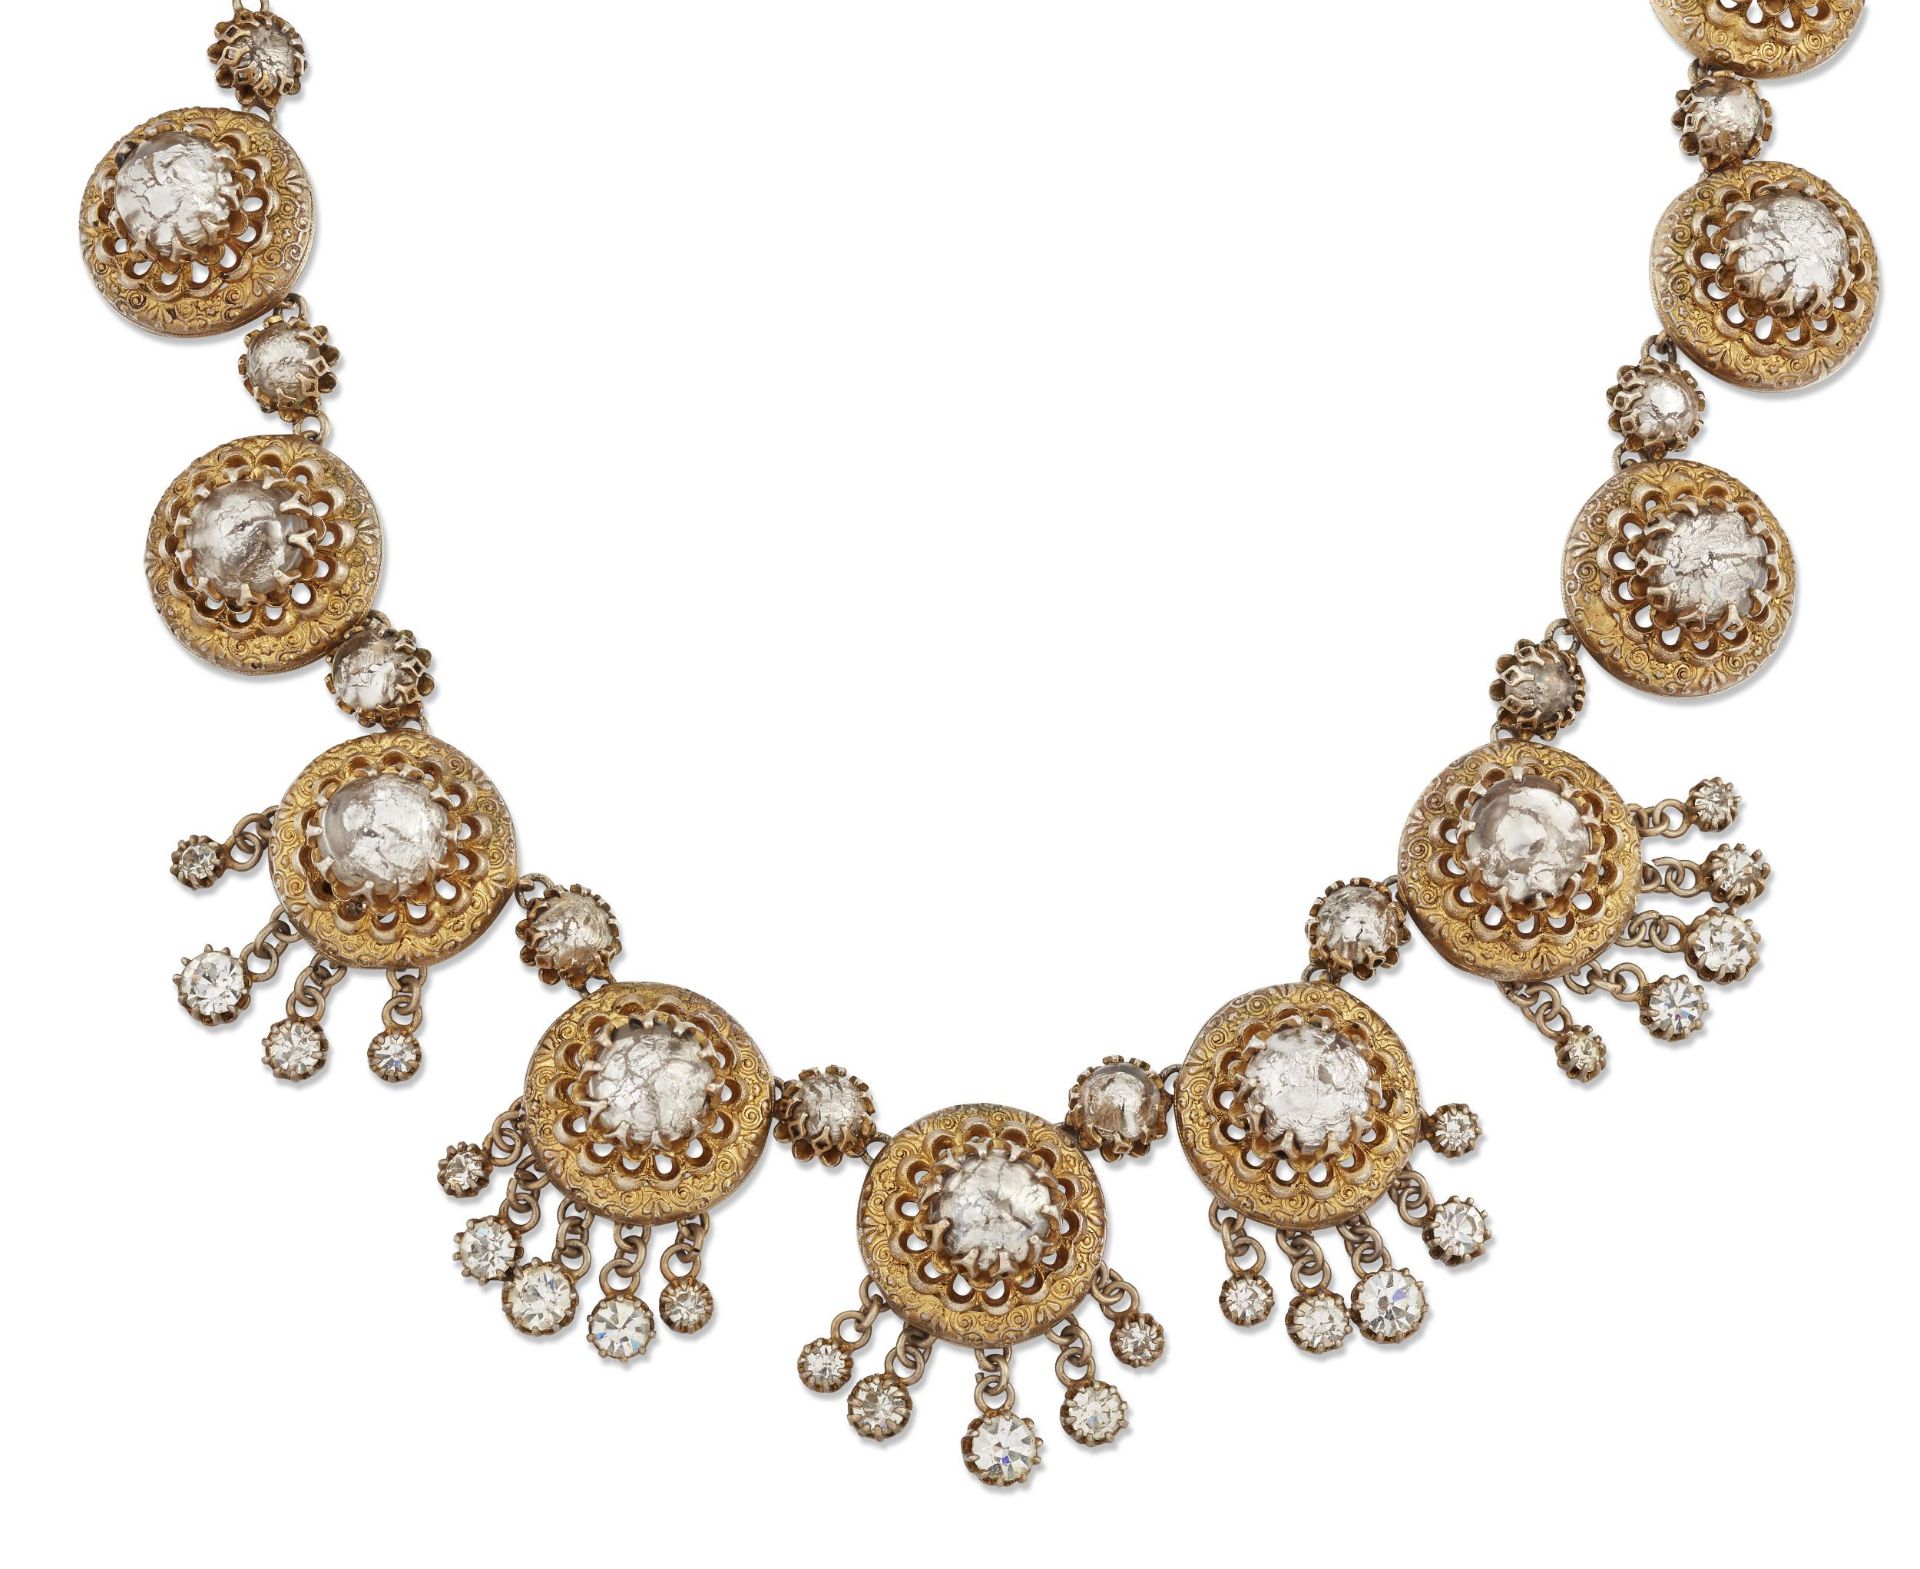 MITCHEL MAER FOR CHRISTIAN DIOR – A GILT METAL AND PASTE NECKLACE, CIRCA 1950S